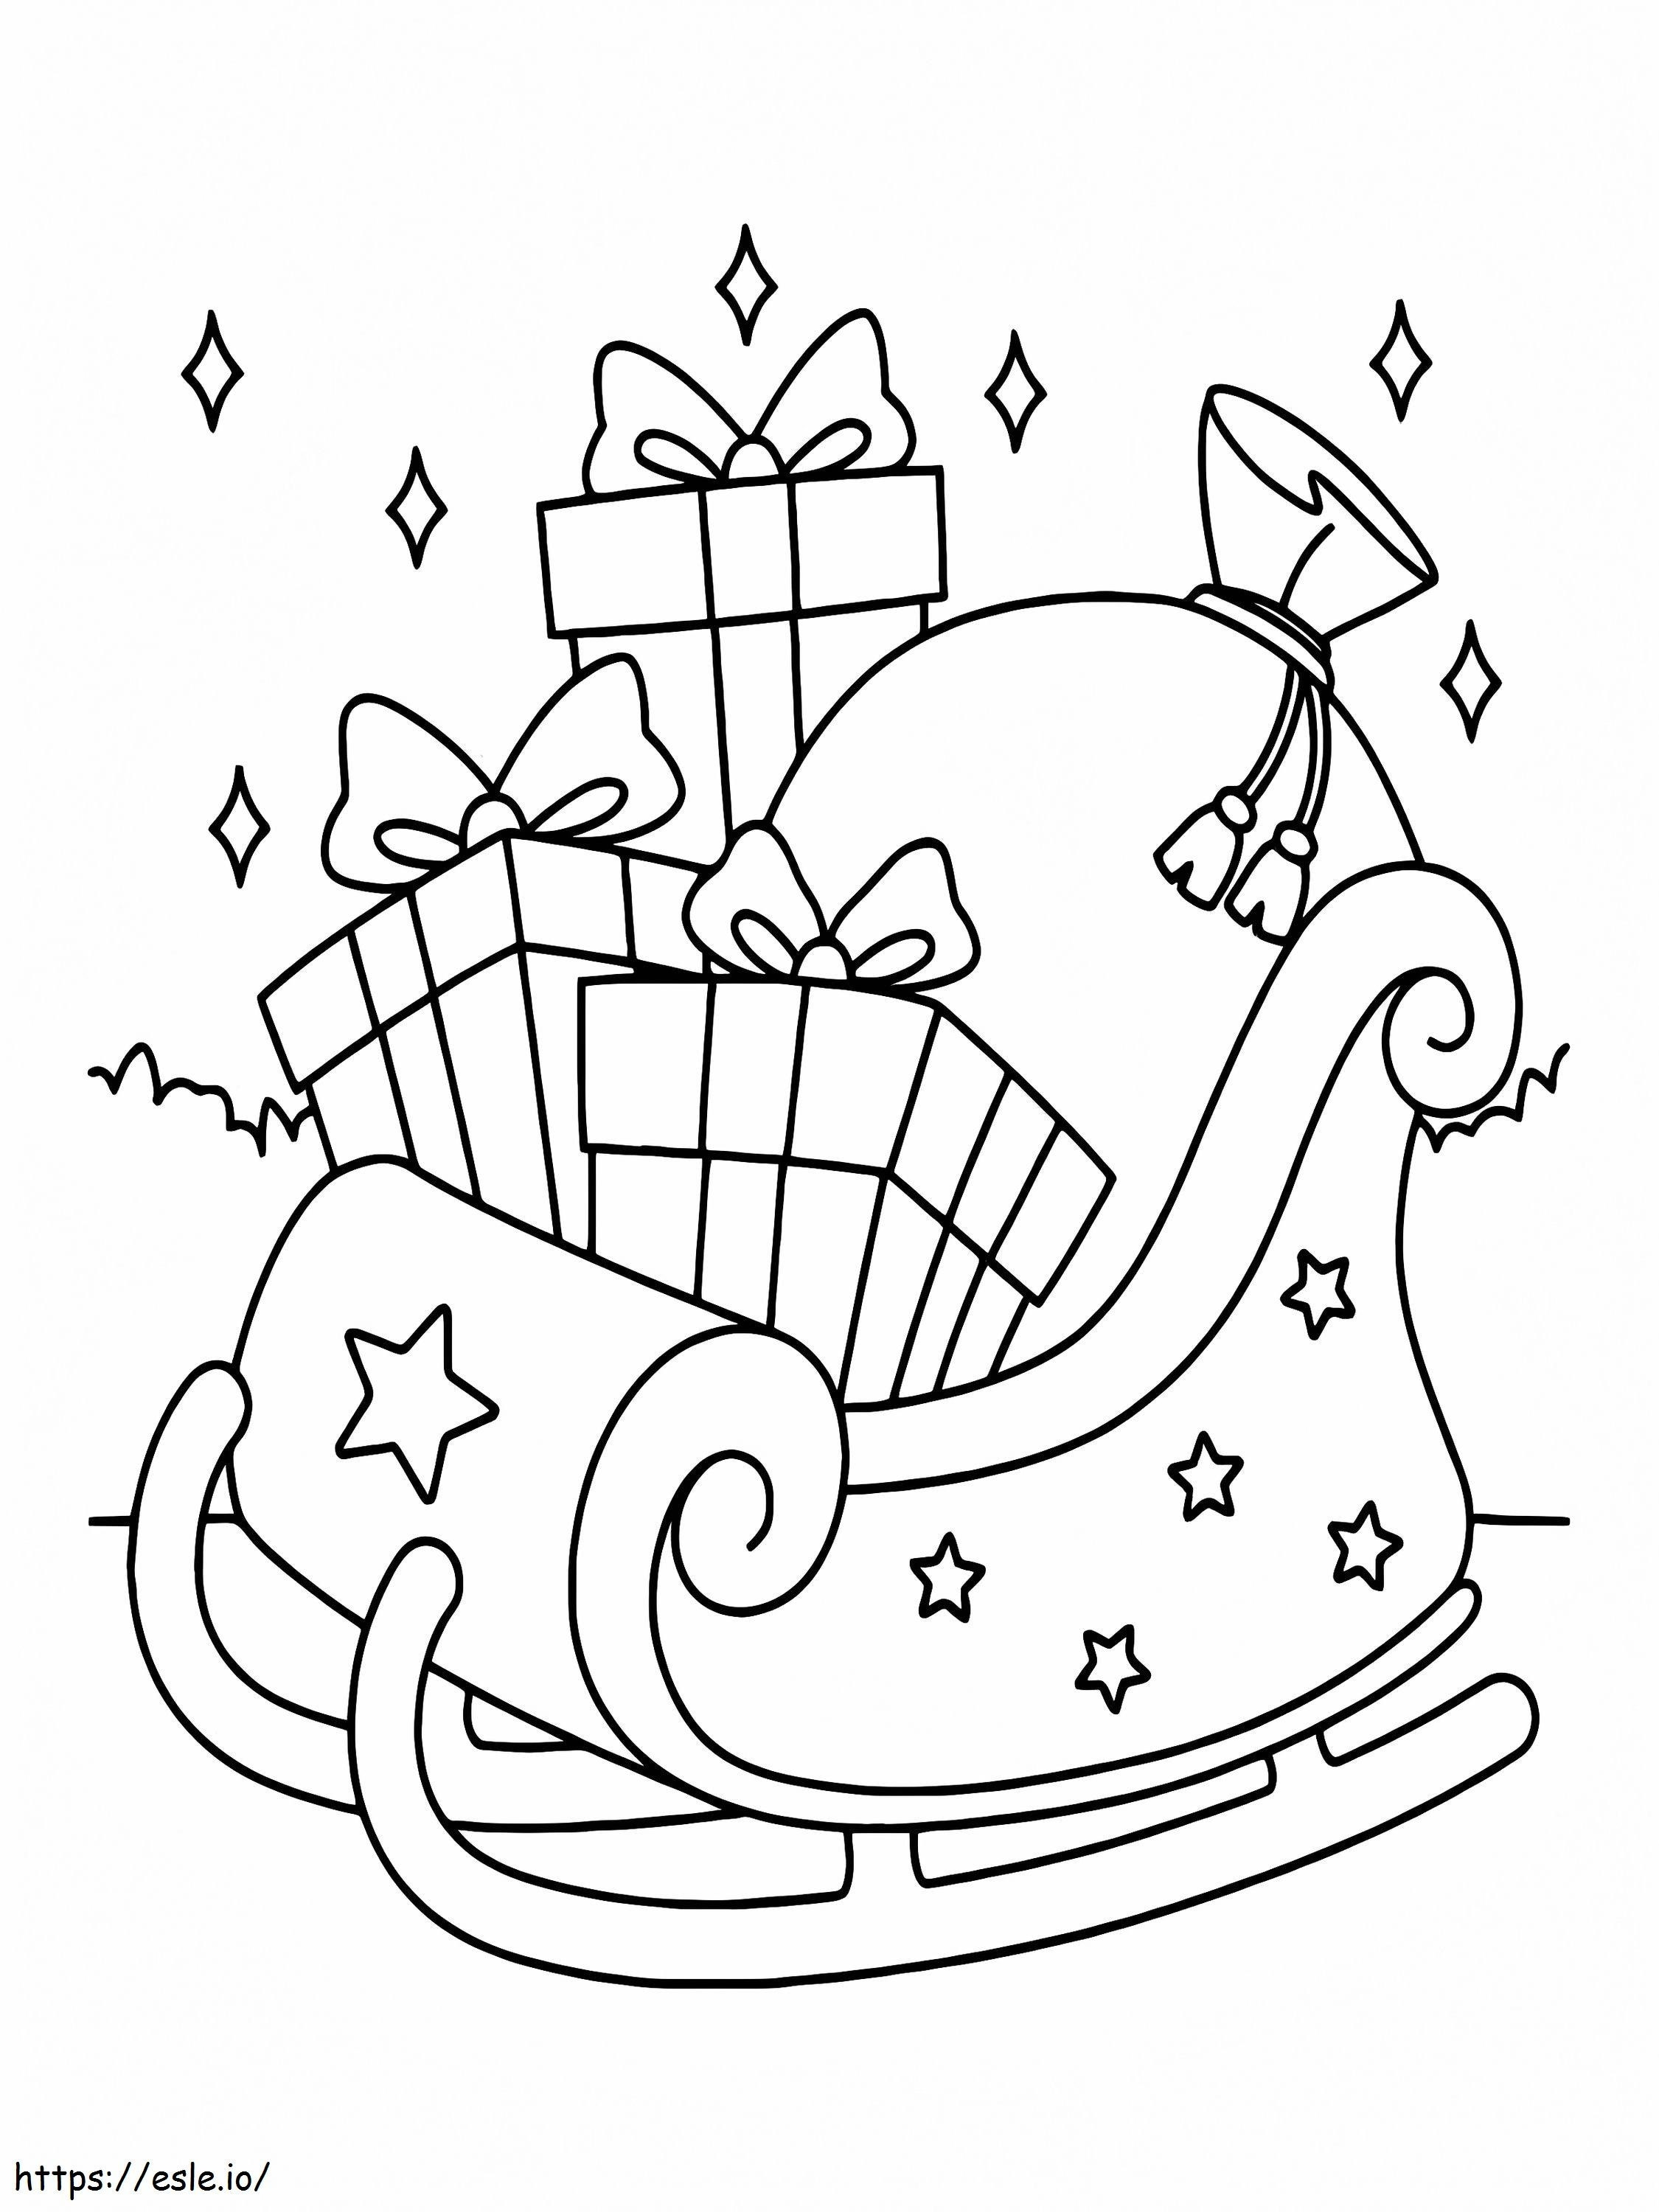 Sleigh With Gifts coloring page